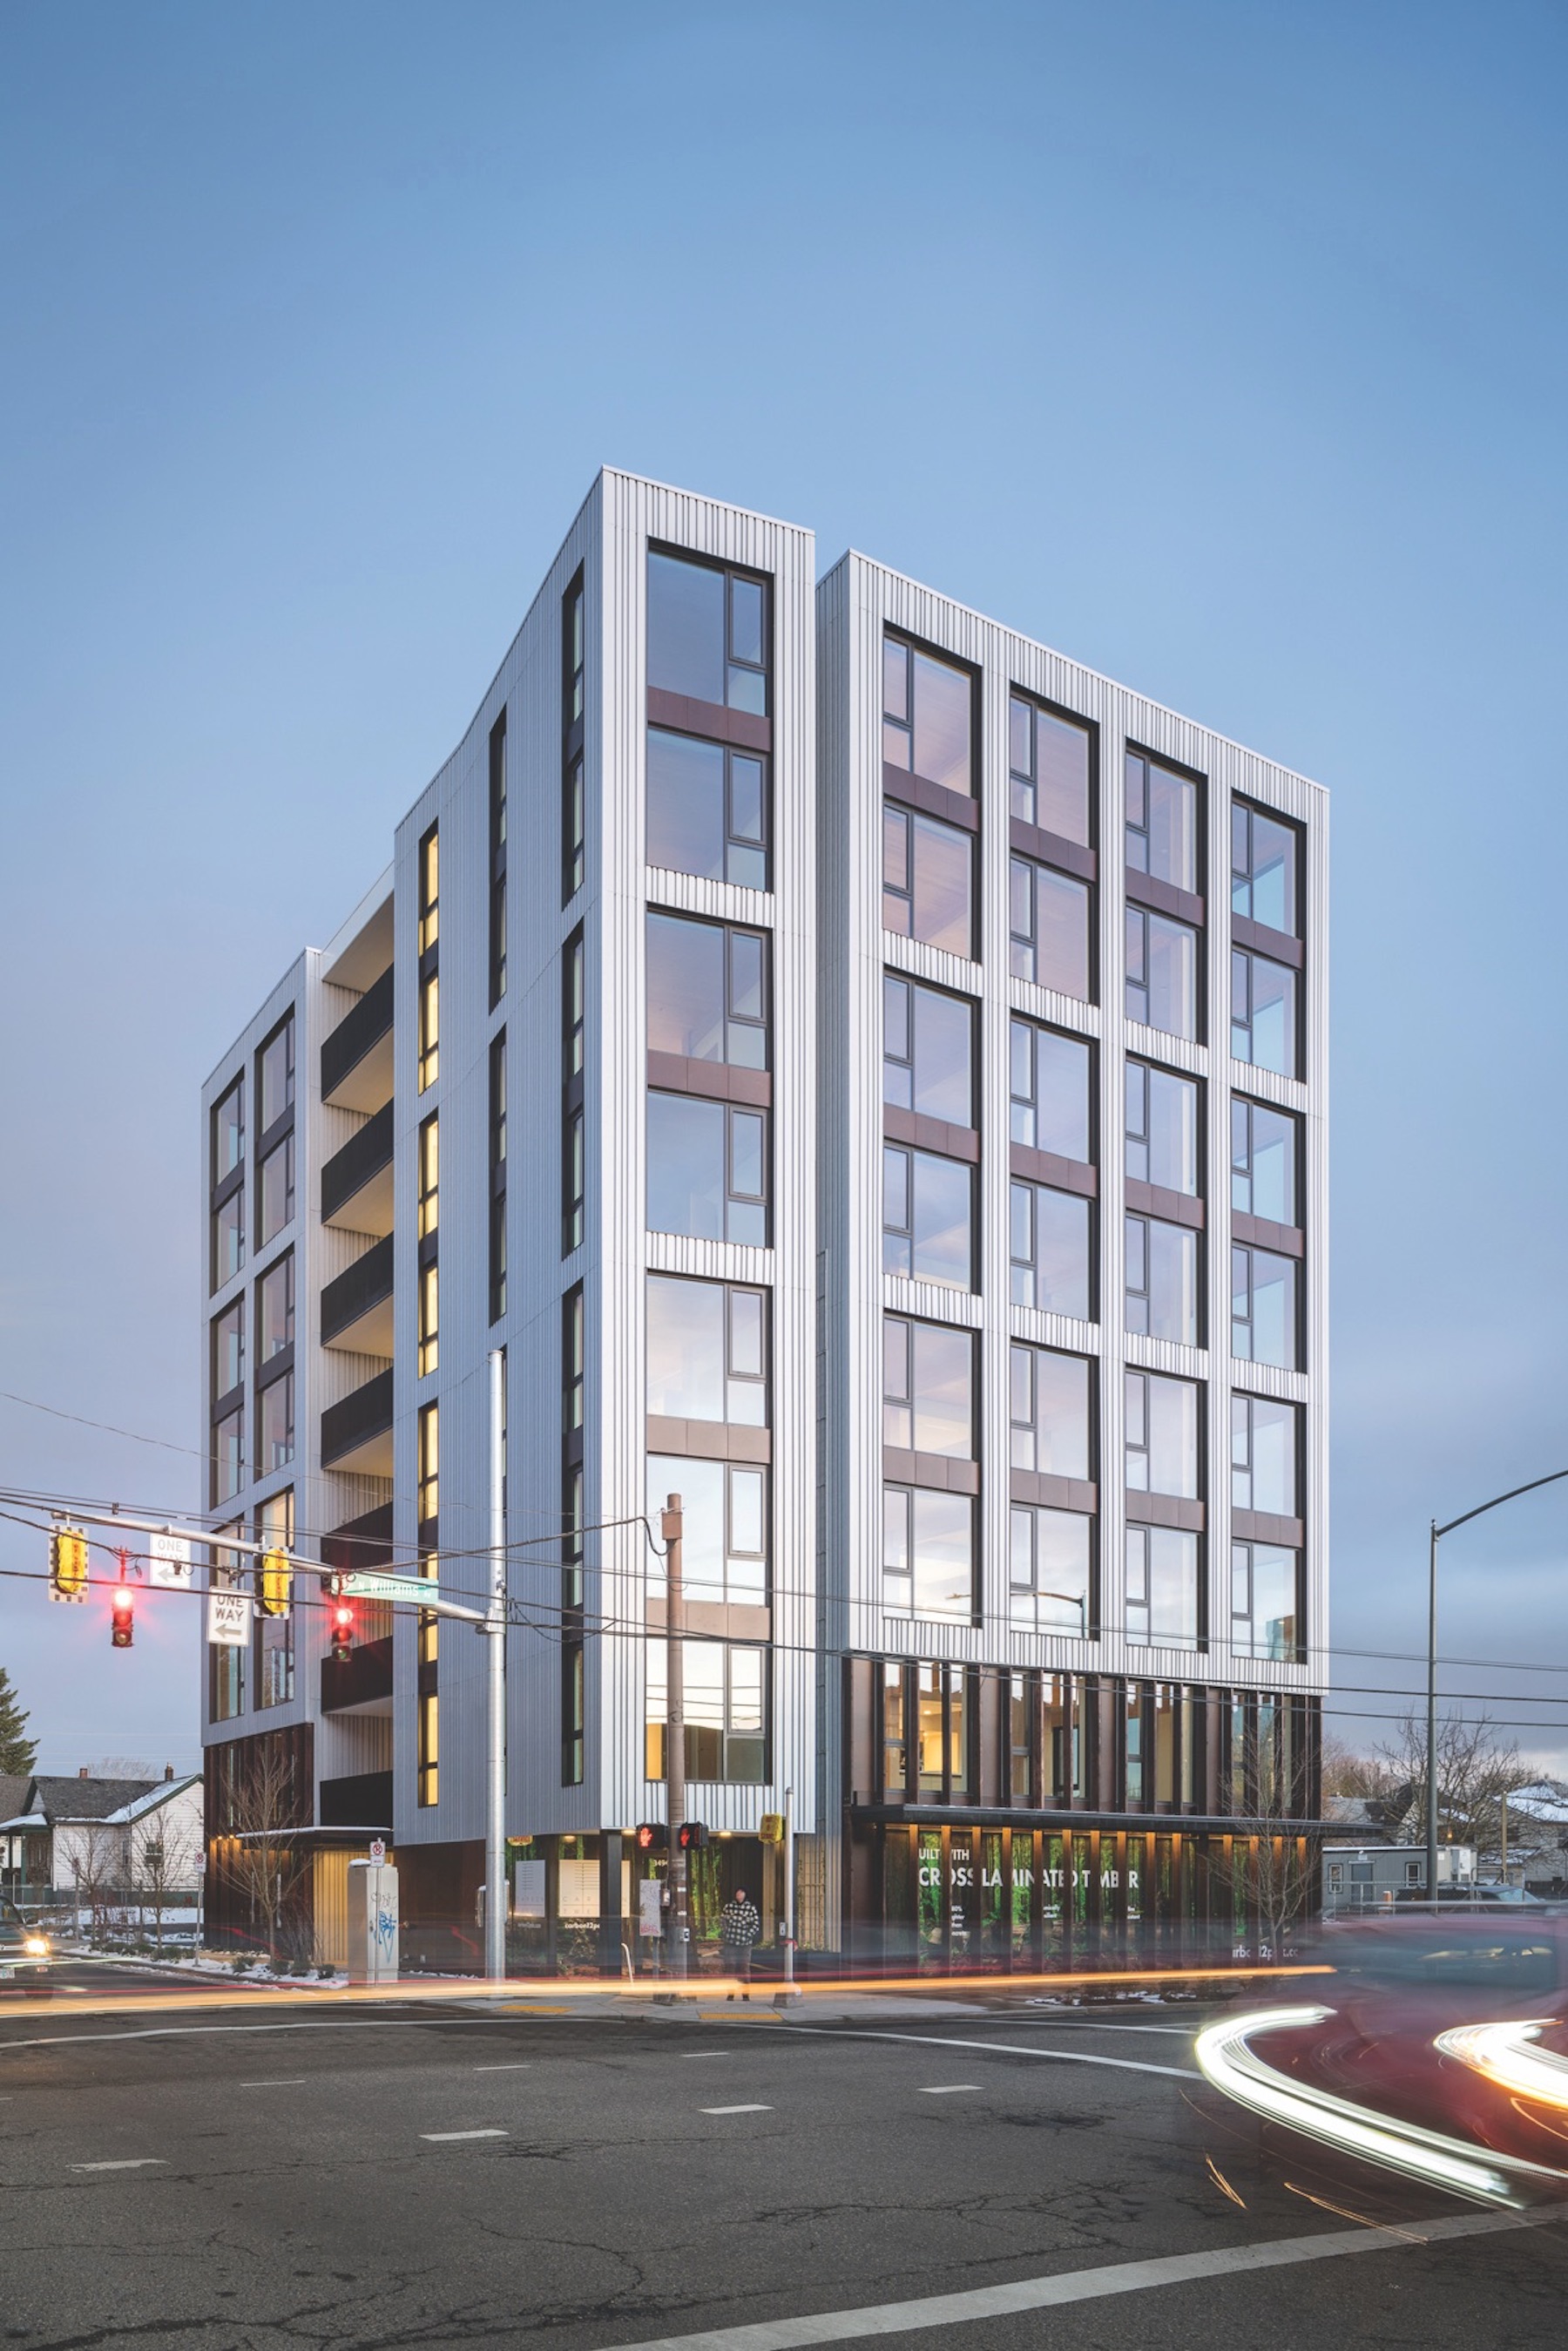 Mass timber for multifamily housing construction - Carbon12 exterior night.jpeg